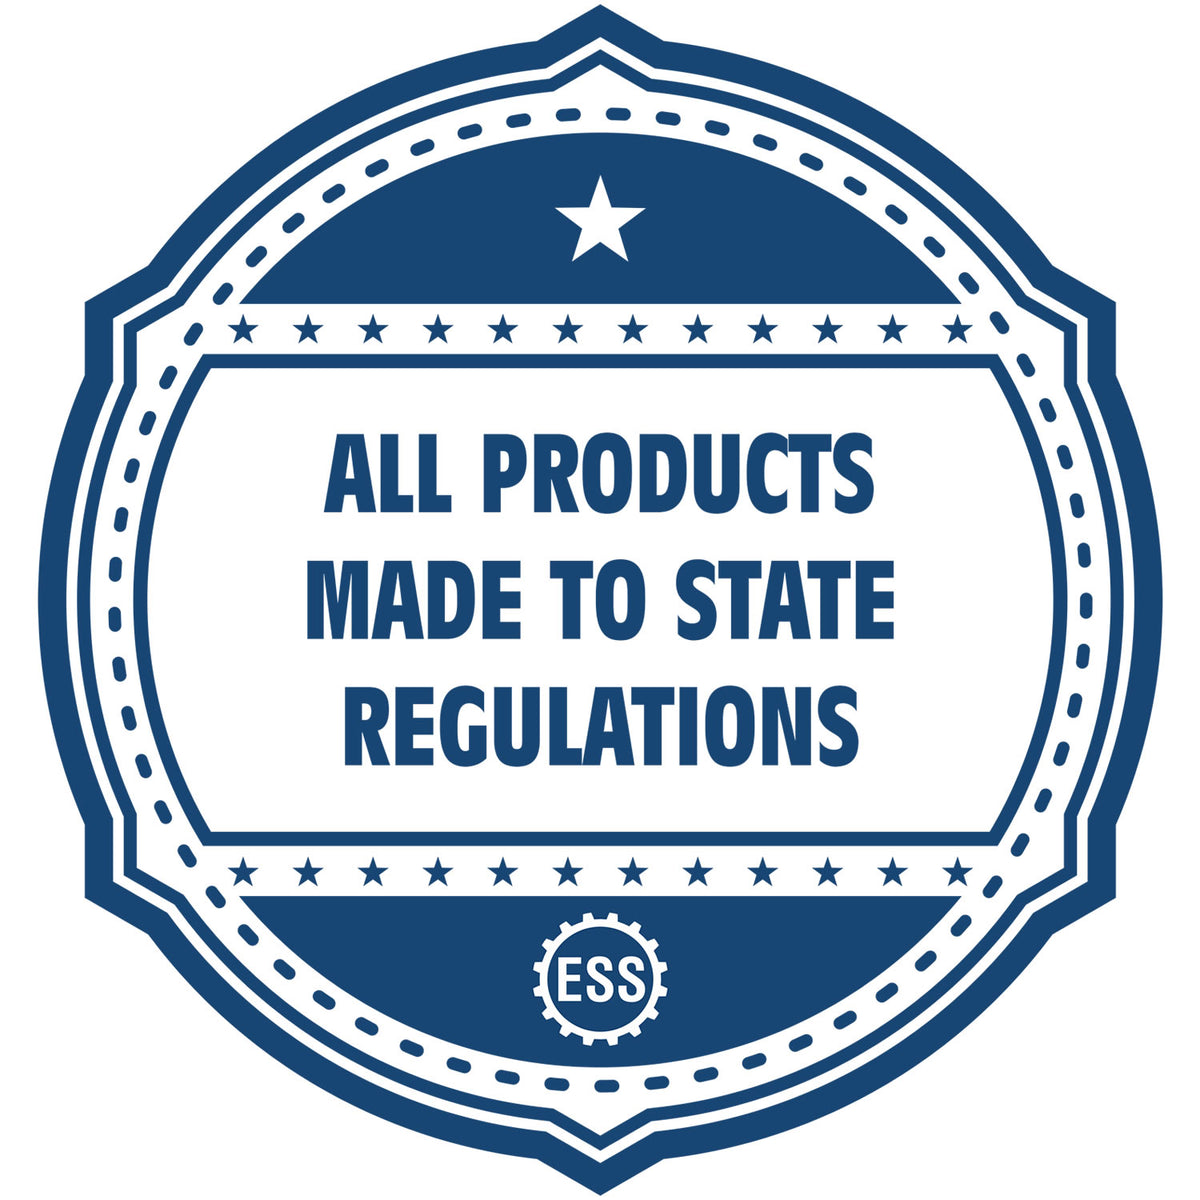 An icon or badge element for the Wooden Handle Ohio State Seal Notary Public Stamp showing that this product is made in compliance with state regulations.